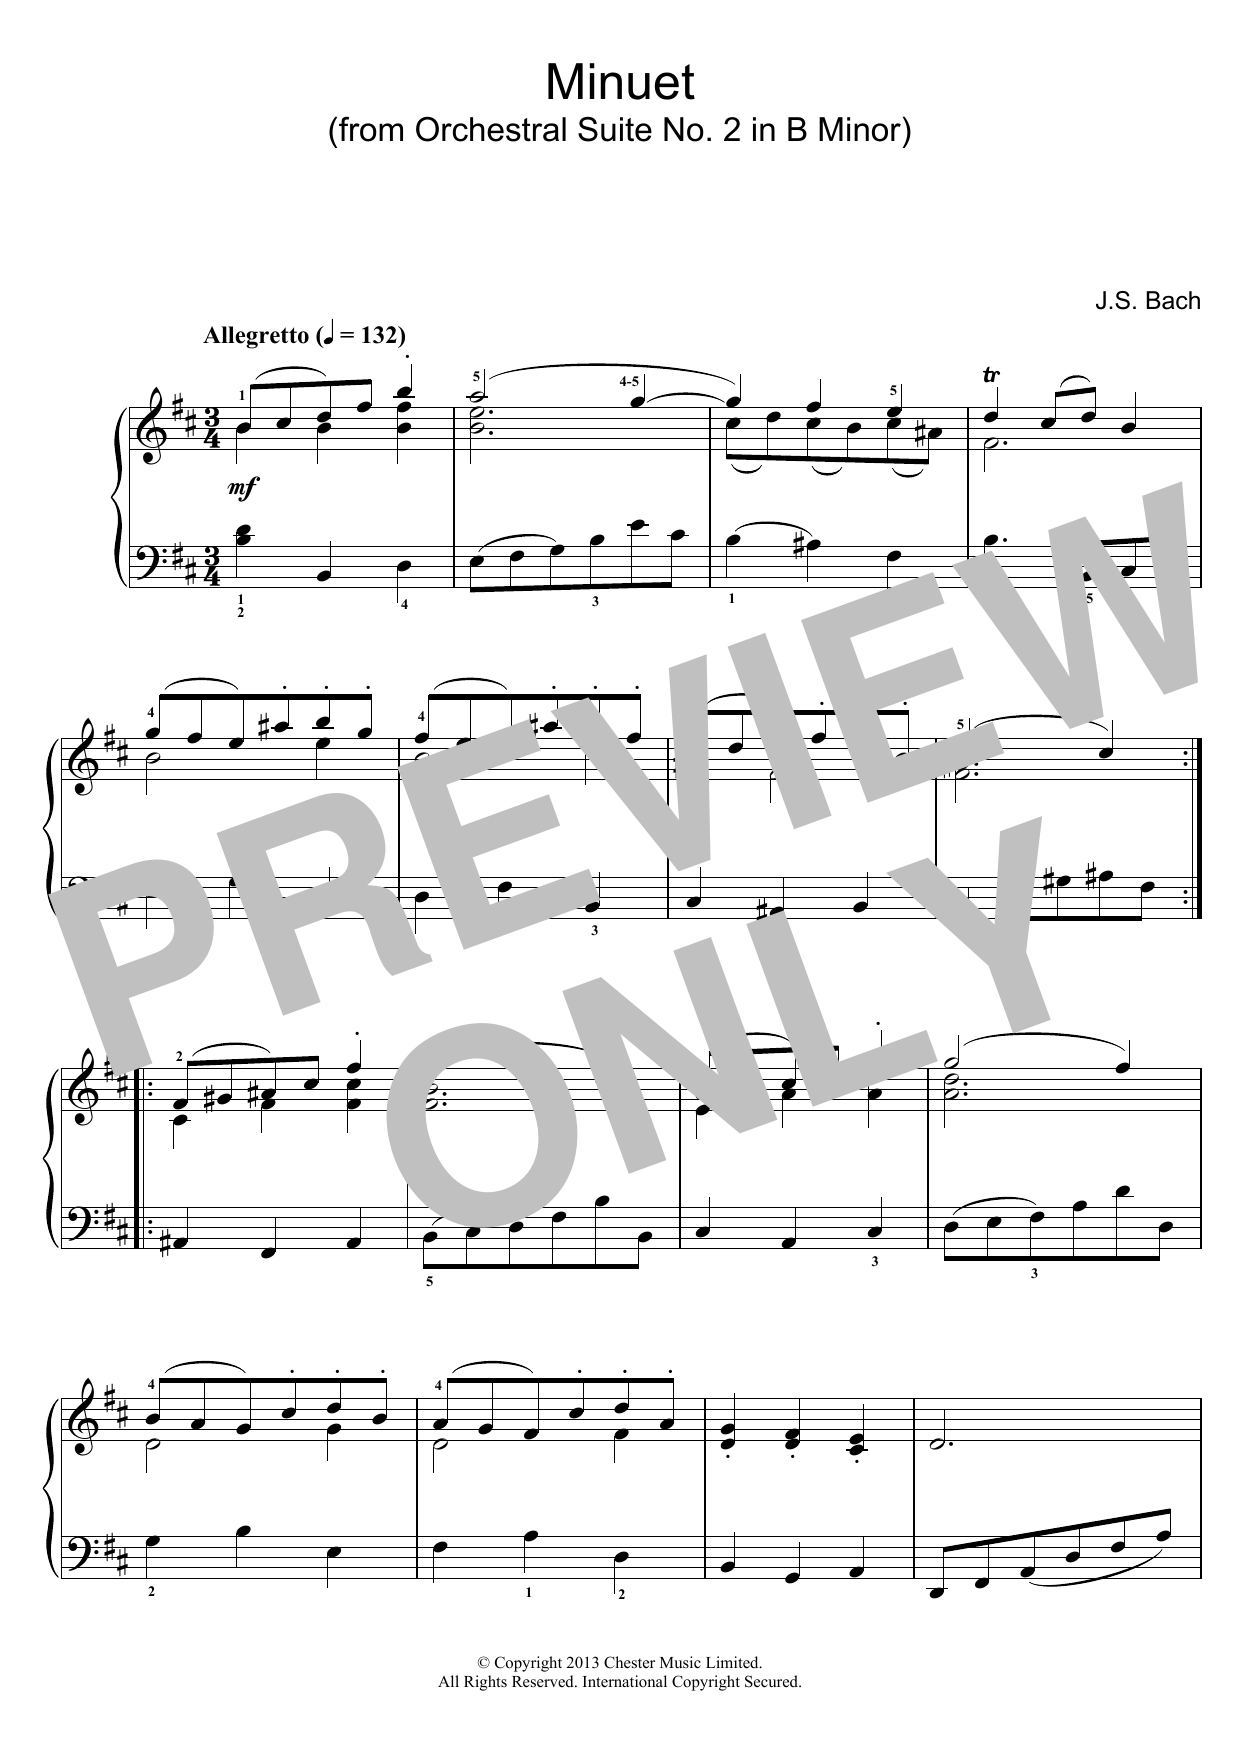 J.S. Bach Minuet in B Minor (from Orchestral Suite No. 2) sheet music preview music notes and score for Piano including 2 page(s)